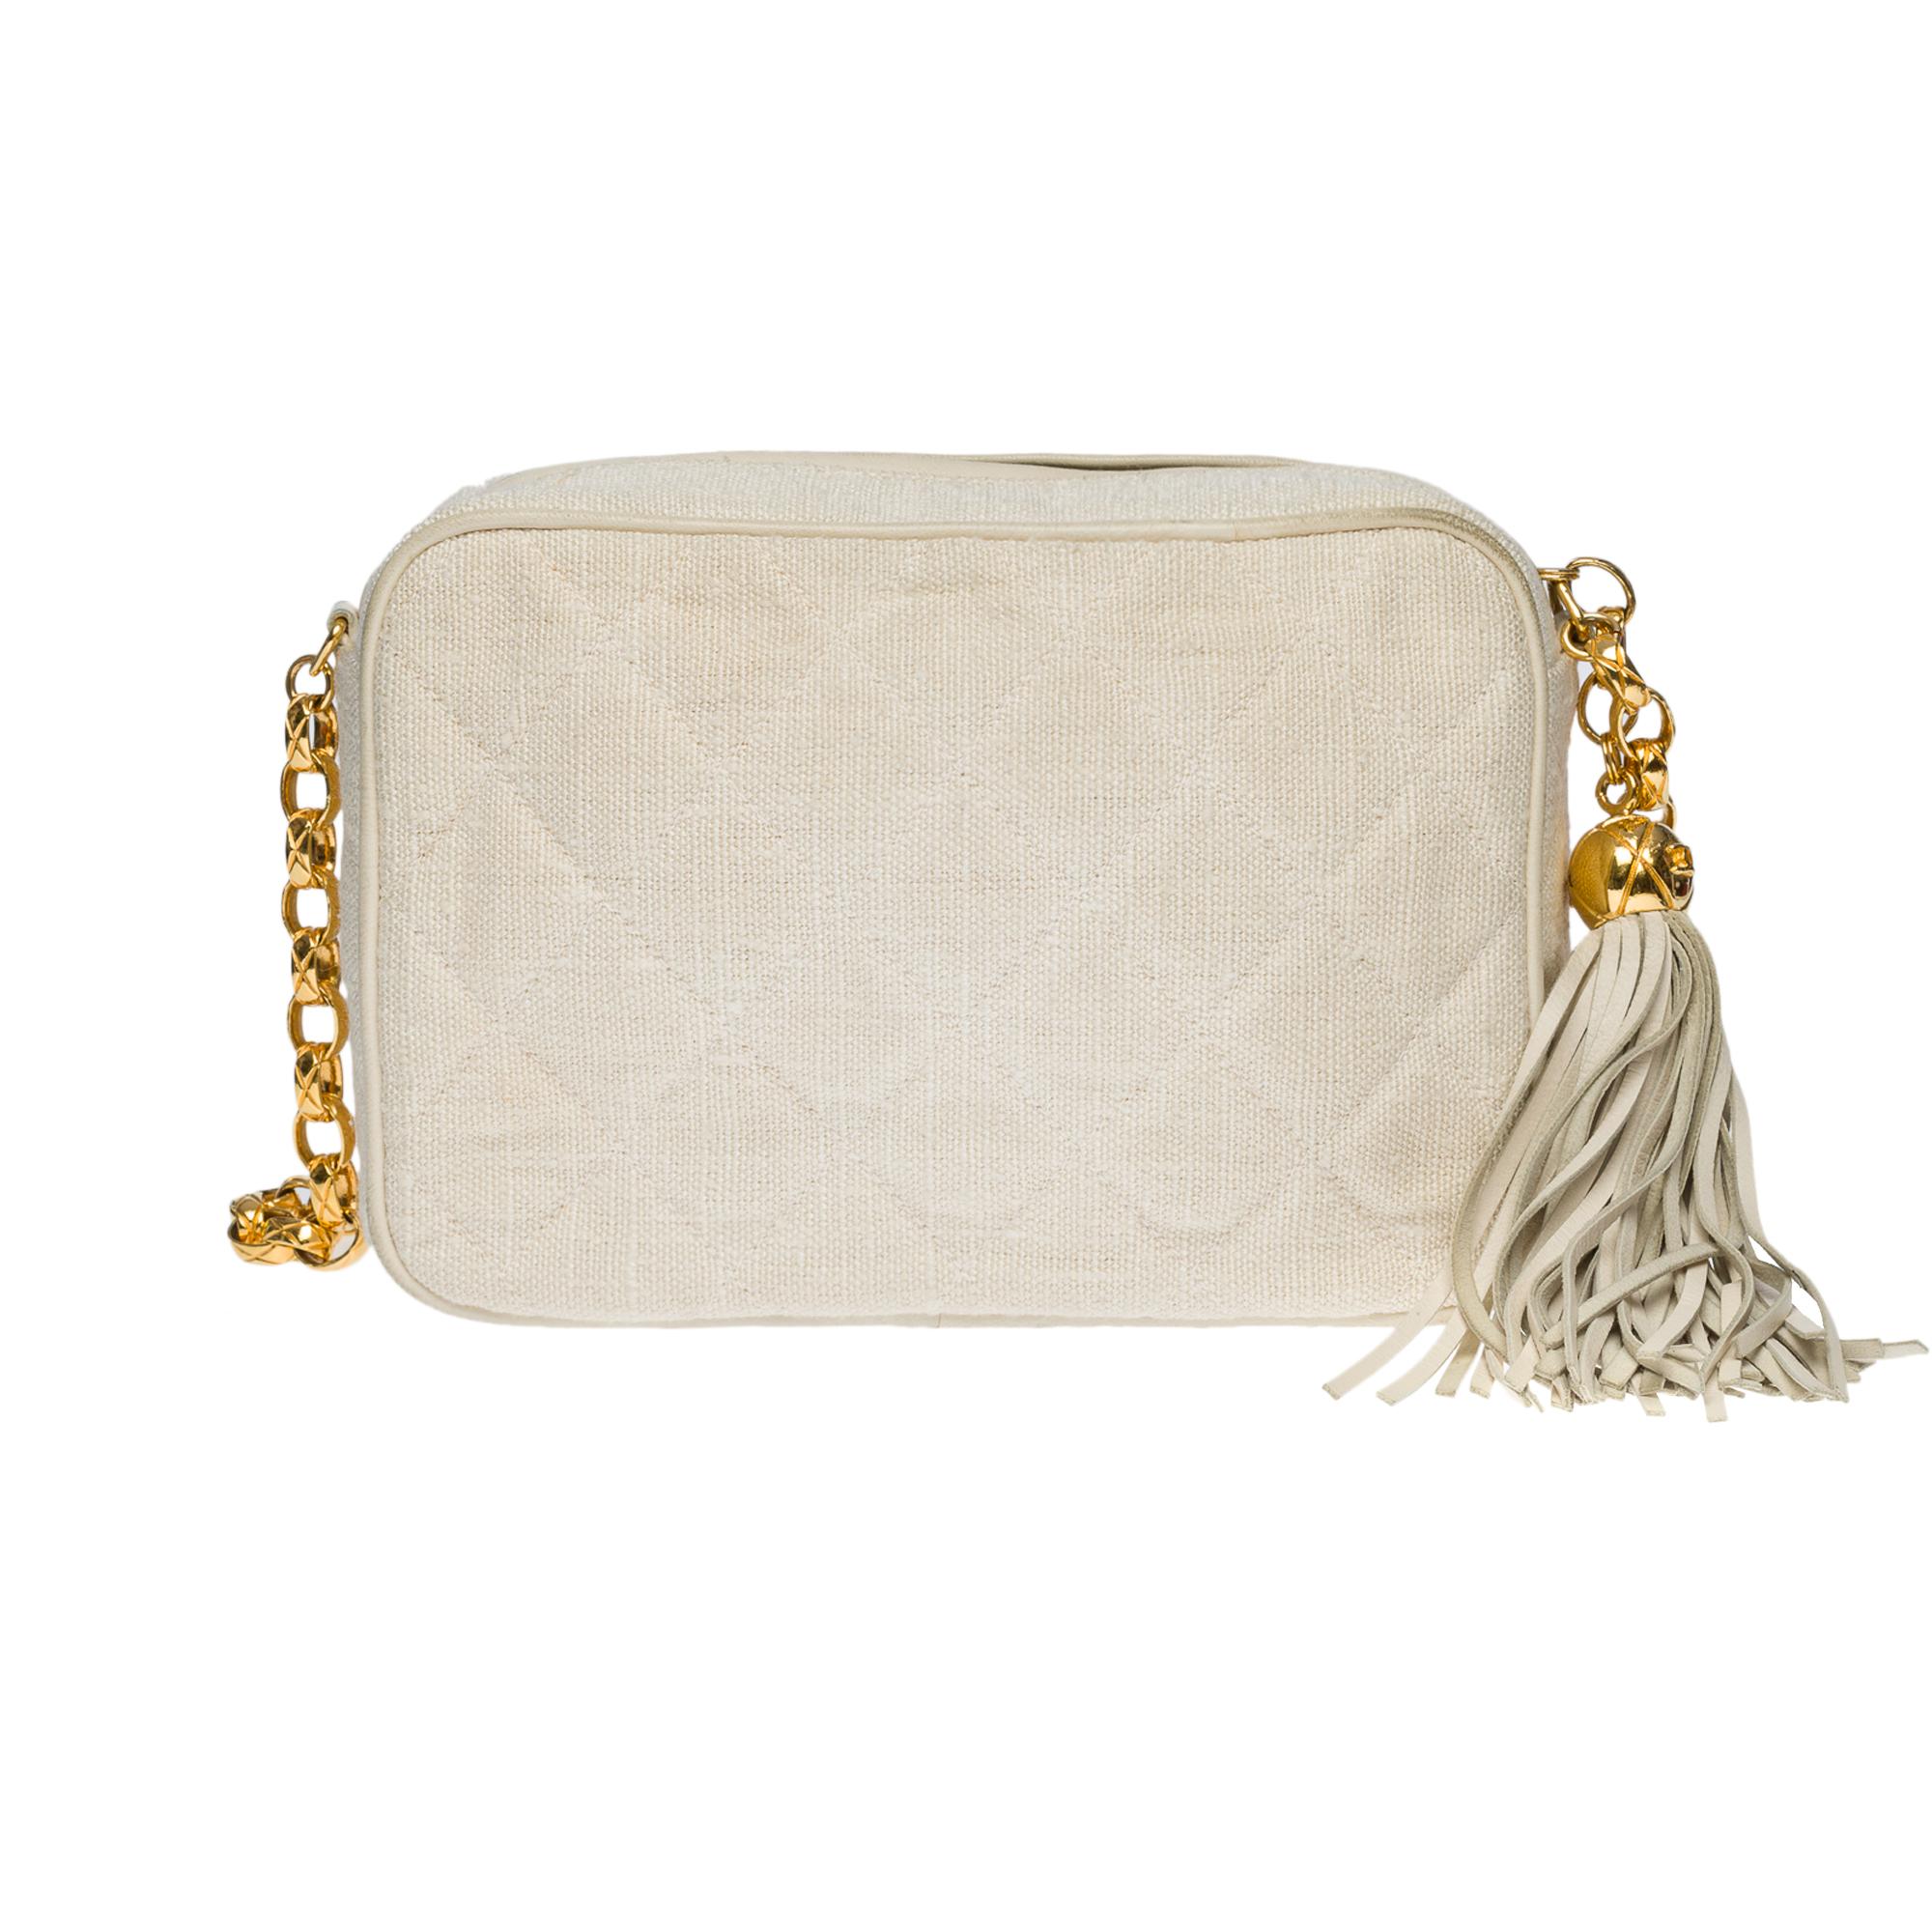 Rare Chanel Mini Camera shoulder bag in ecru quilted linen, gold-plated metal hardware, a gold-plated metal chain handle for hand, shoulder or crossbody support
2 stacked patch pockets on the front
Gold charm on the zip with white leather fringe
A